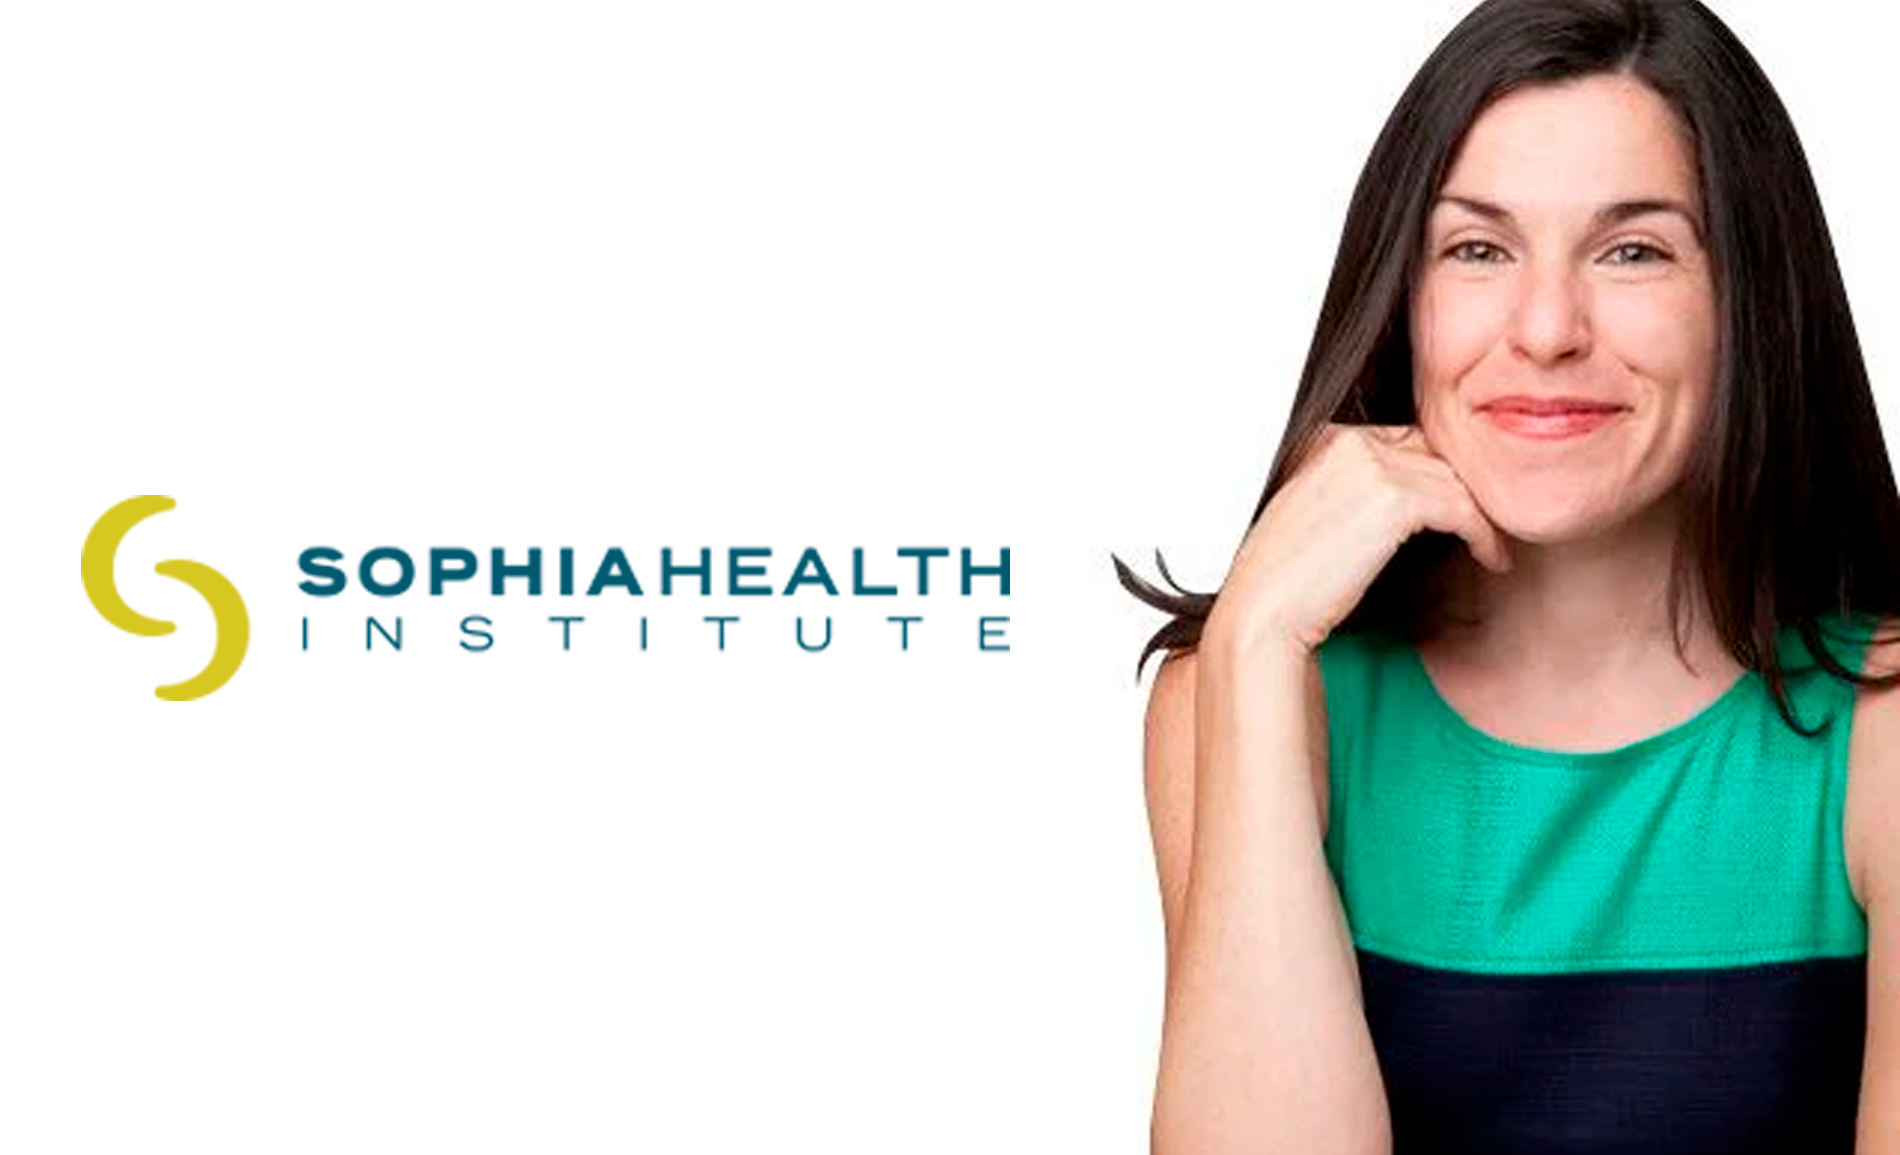 Sophia Health Institute Discusses How They Use Briotech's HOCl